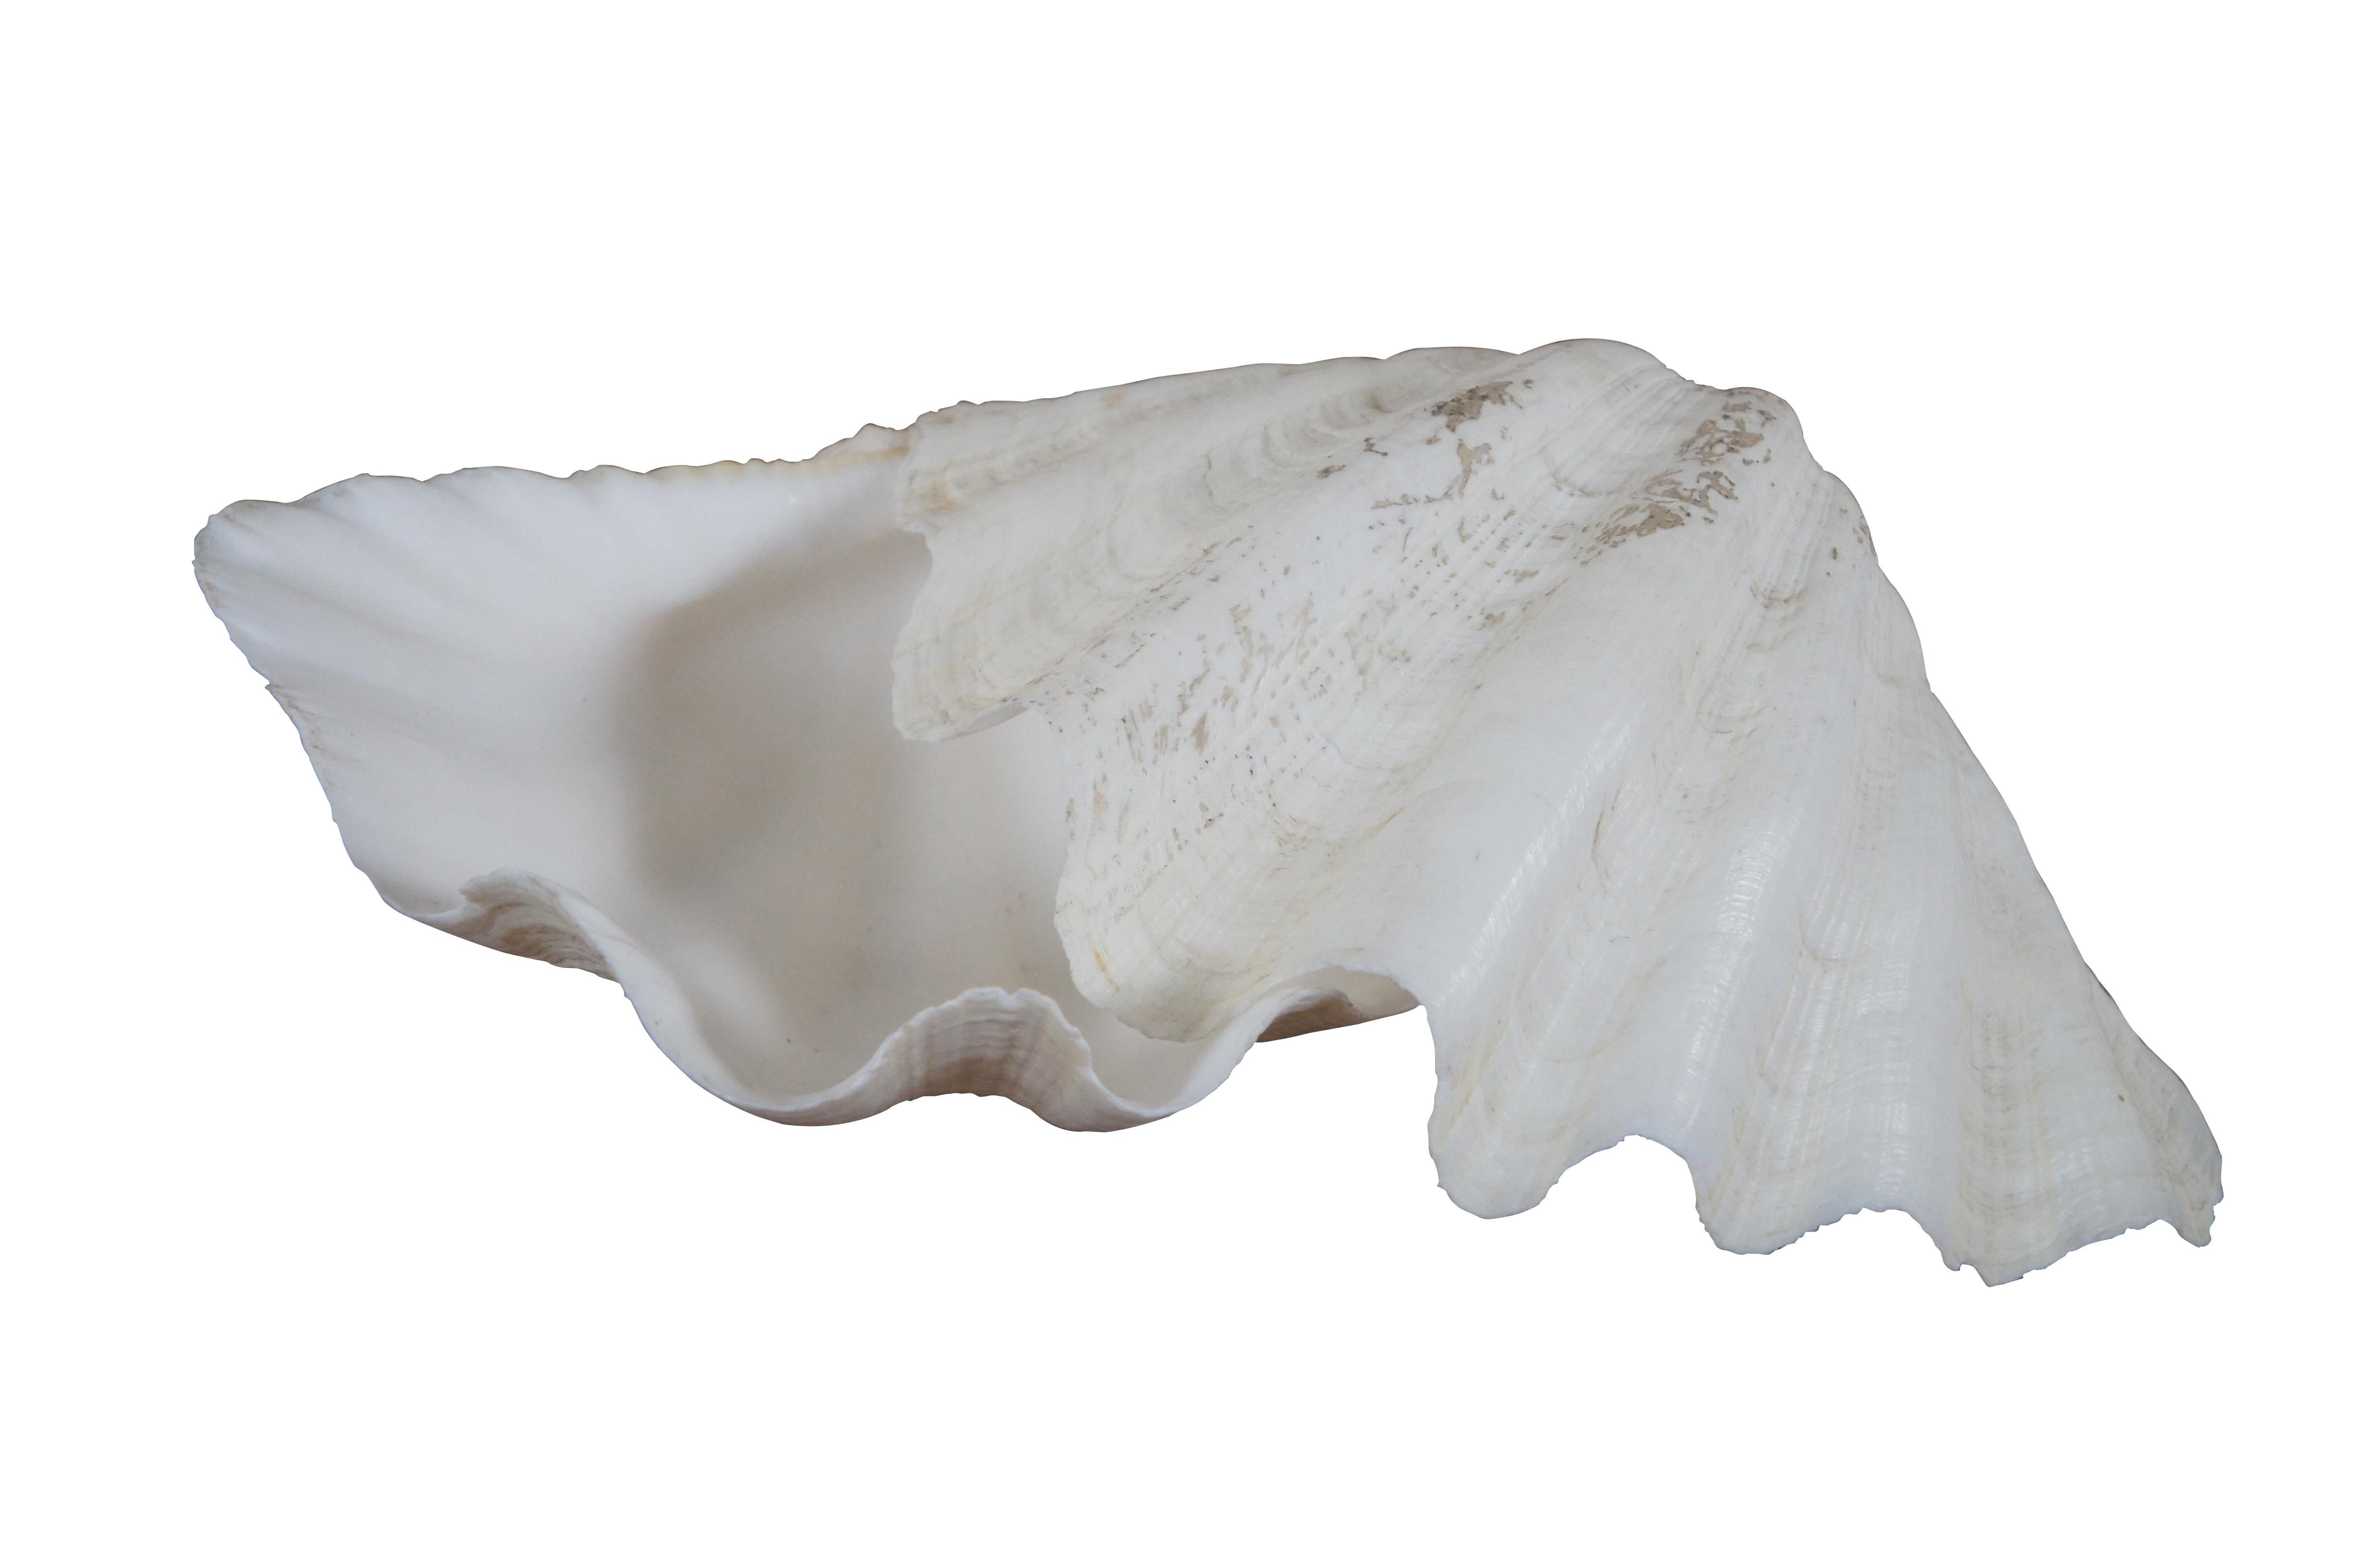 giant clam shell price philippines